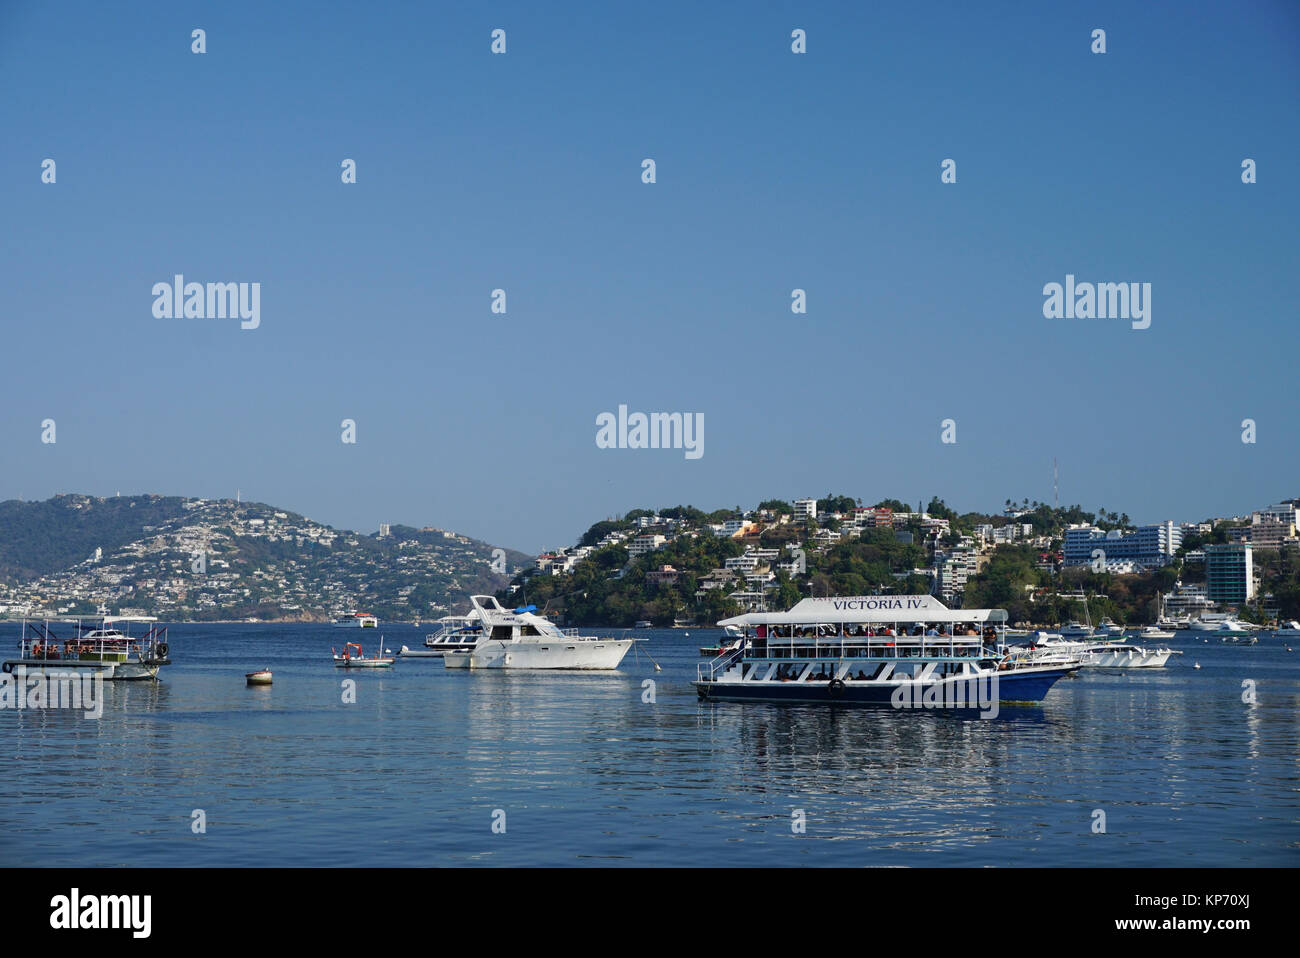 Tourist boats in the Bay of Acapulco, Acapulco, Mexico Stock Photo